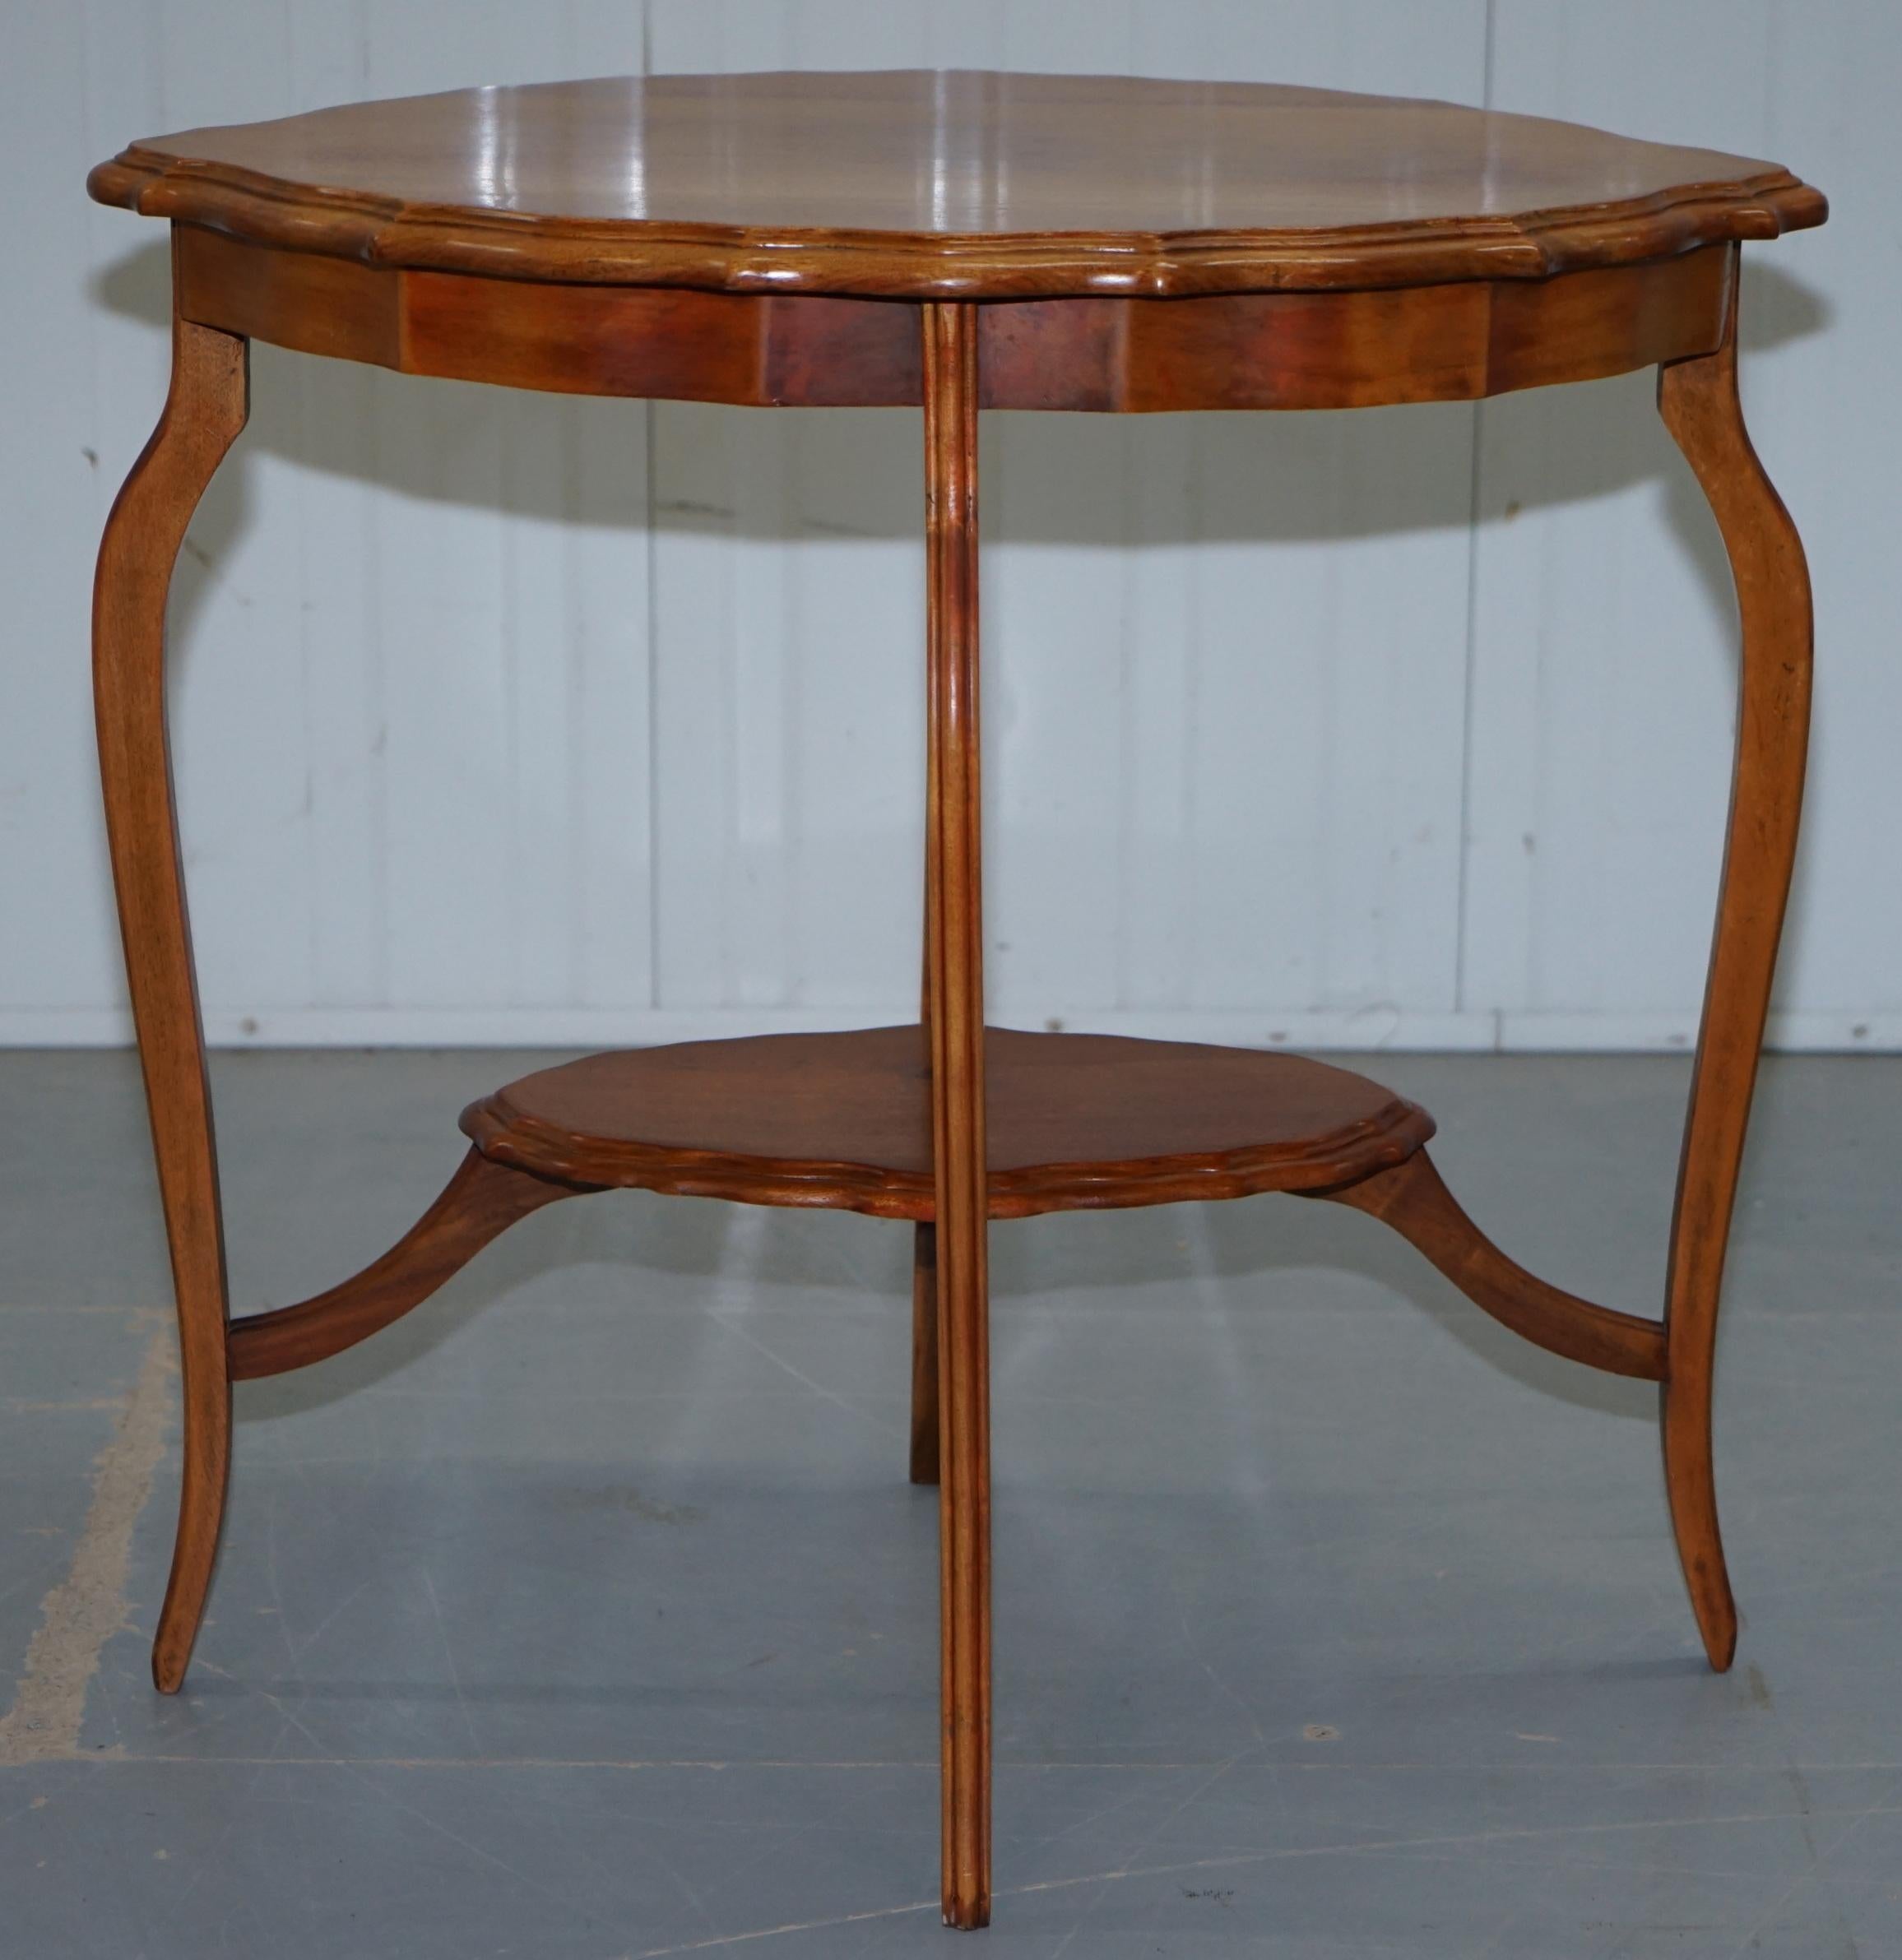 20th Century Lovely Decorative Satinwood Occasional Centre Table Scalloped Edge Ornate Legs For Sale